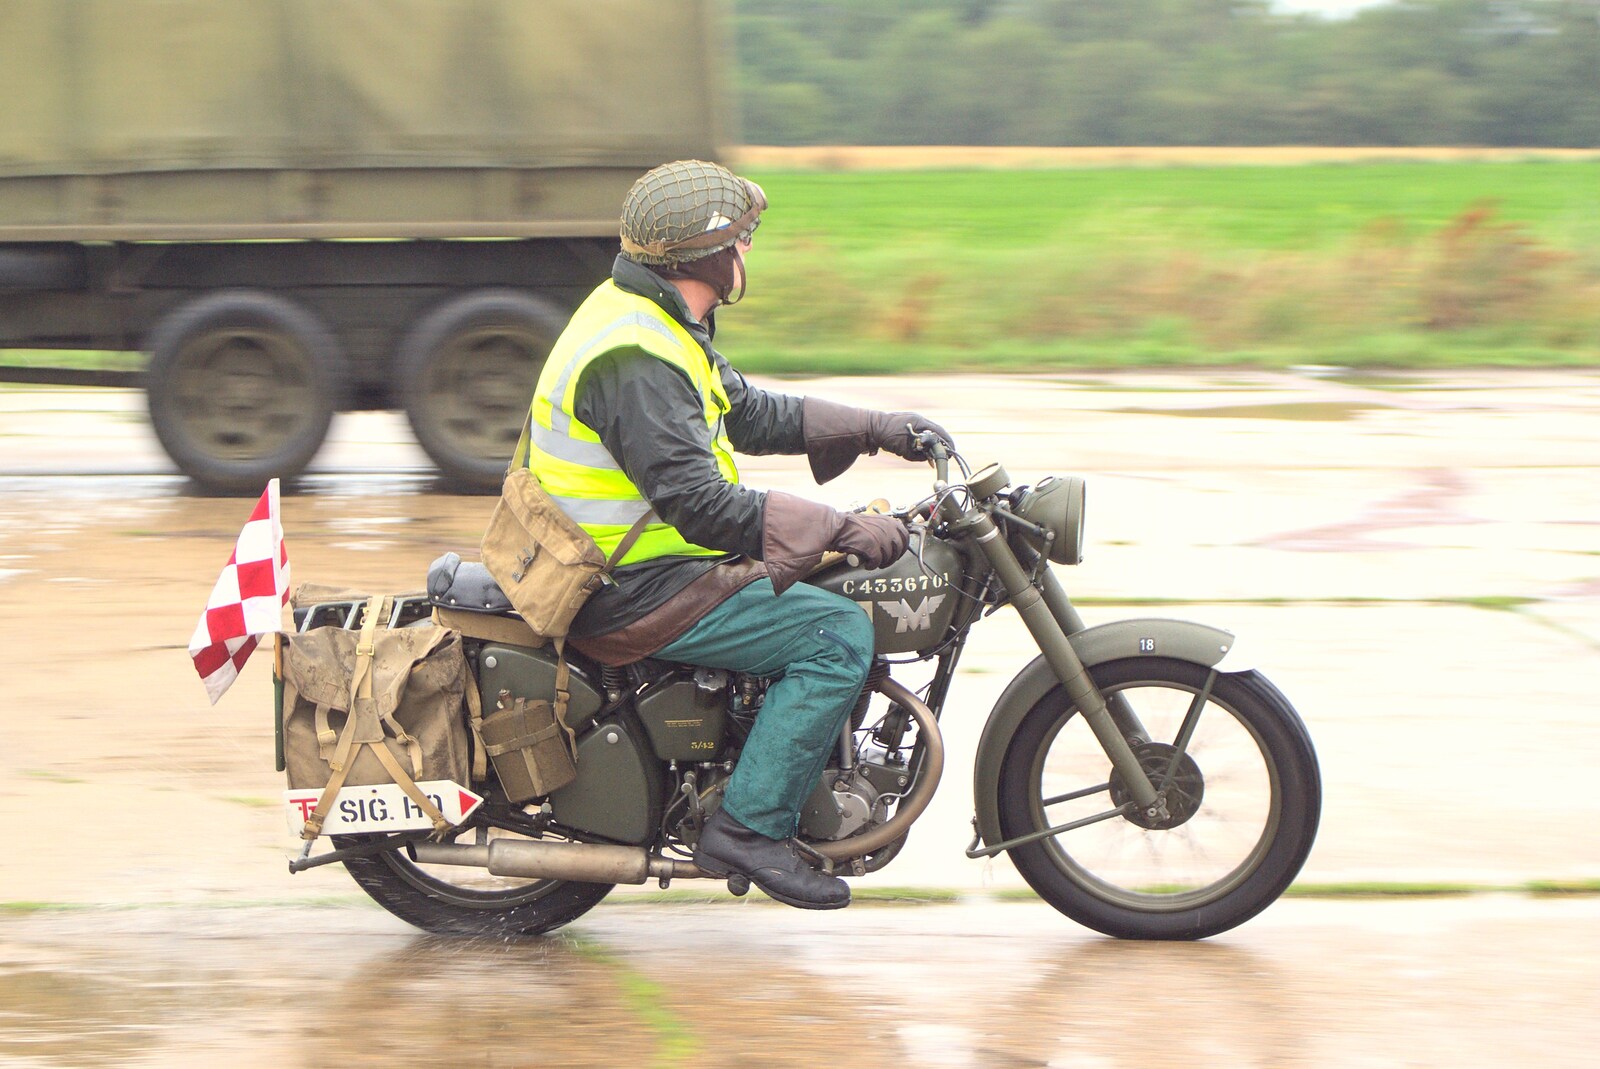 A bike scoots around from Clive's Military Vehicle Convoy, Brome Aerodrome, Suffolk - 16th July 2011